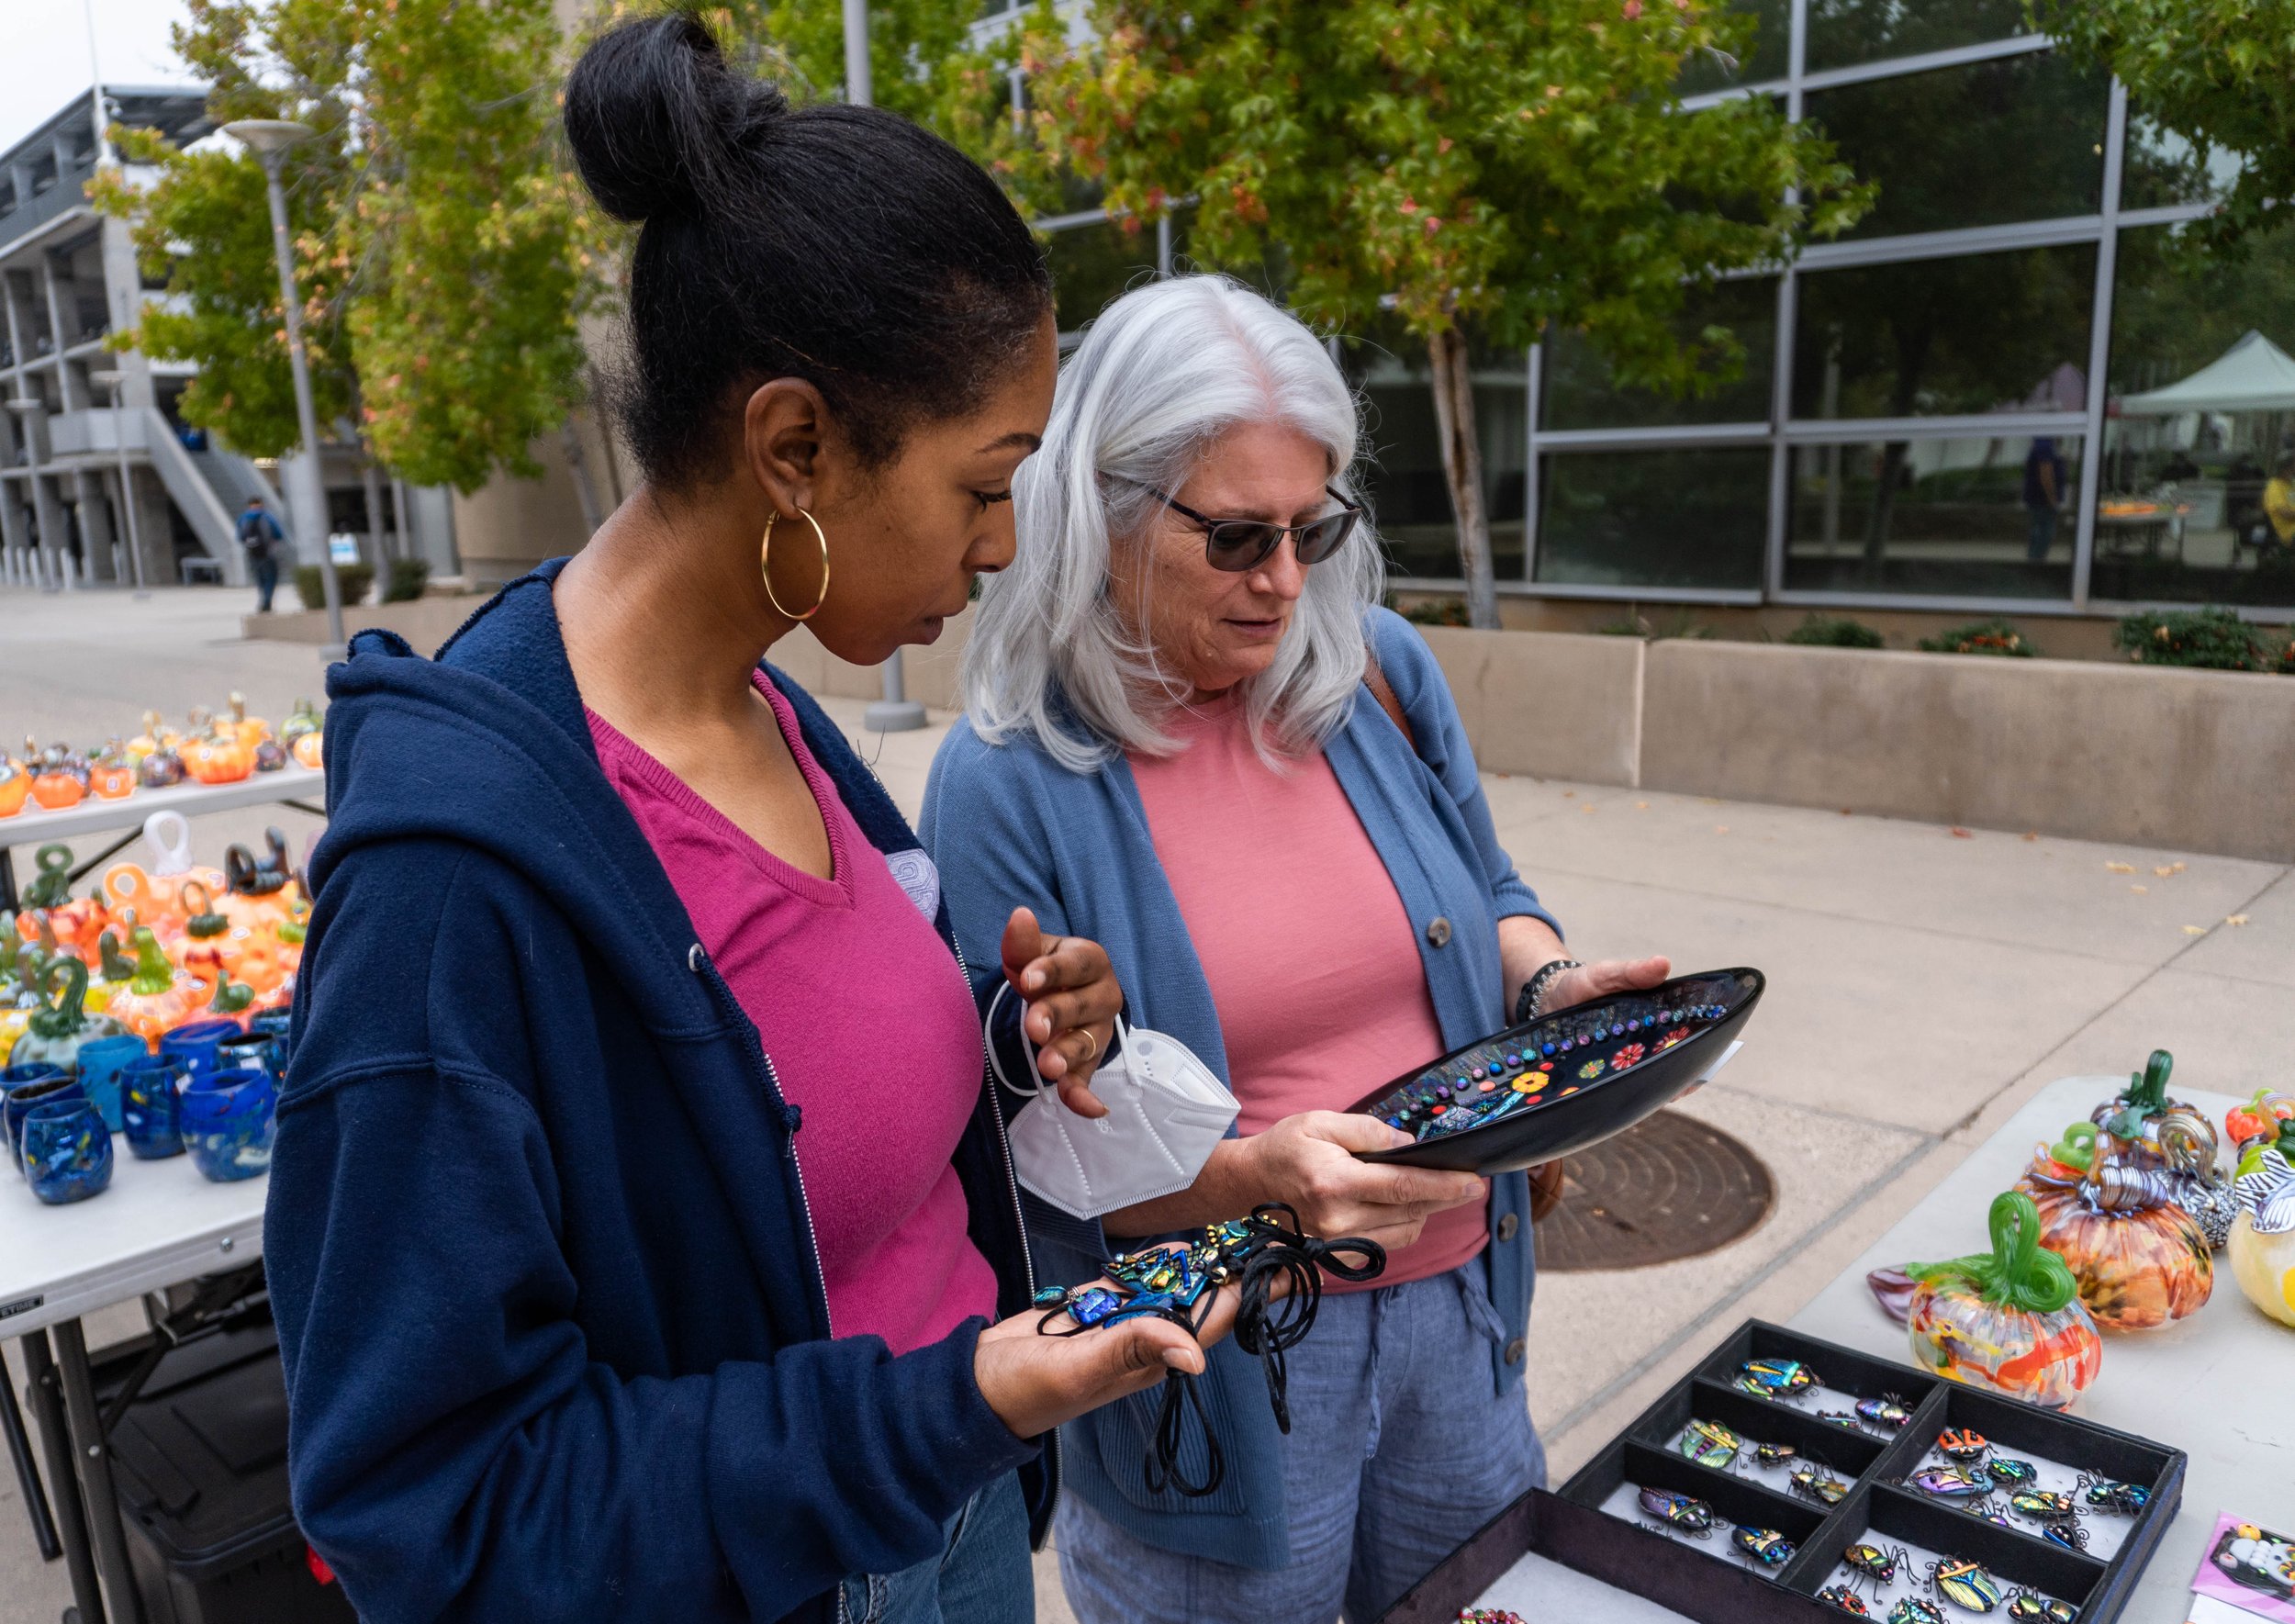  Anisha DiGregorio, Santa Monica College (SMC) Human Resource staff and Susan Caggiano, a faculty member of the English department browse through the many art pieces for sale at the SMC Art Department's annual Glass Pumpkin Sales. DiGregorio has been